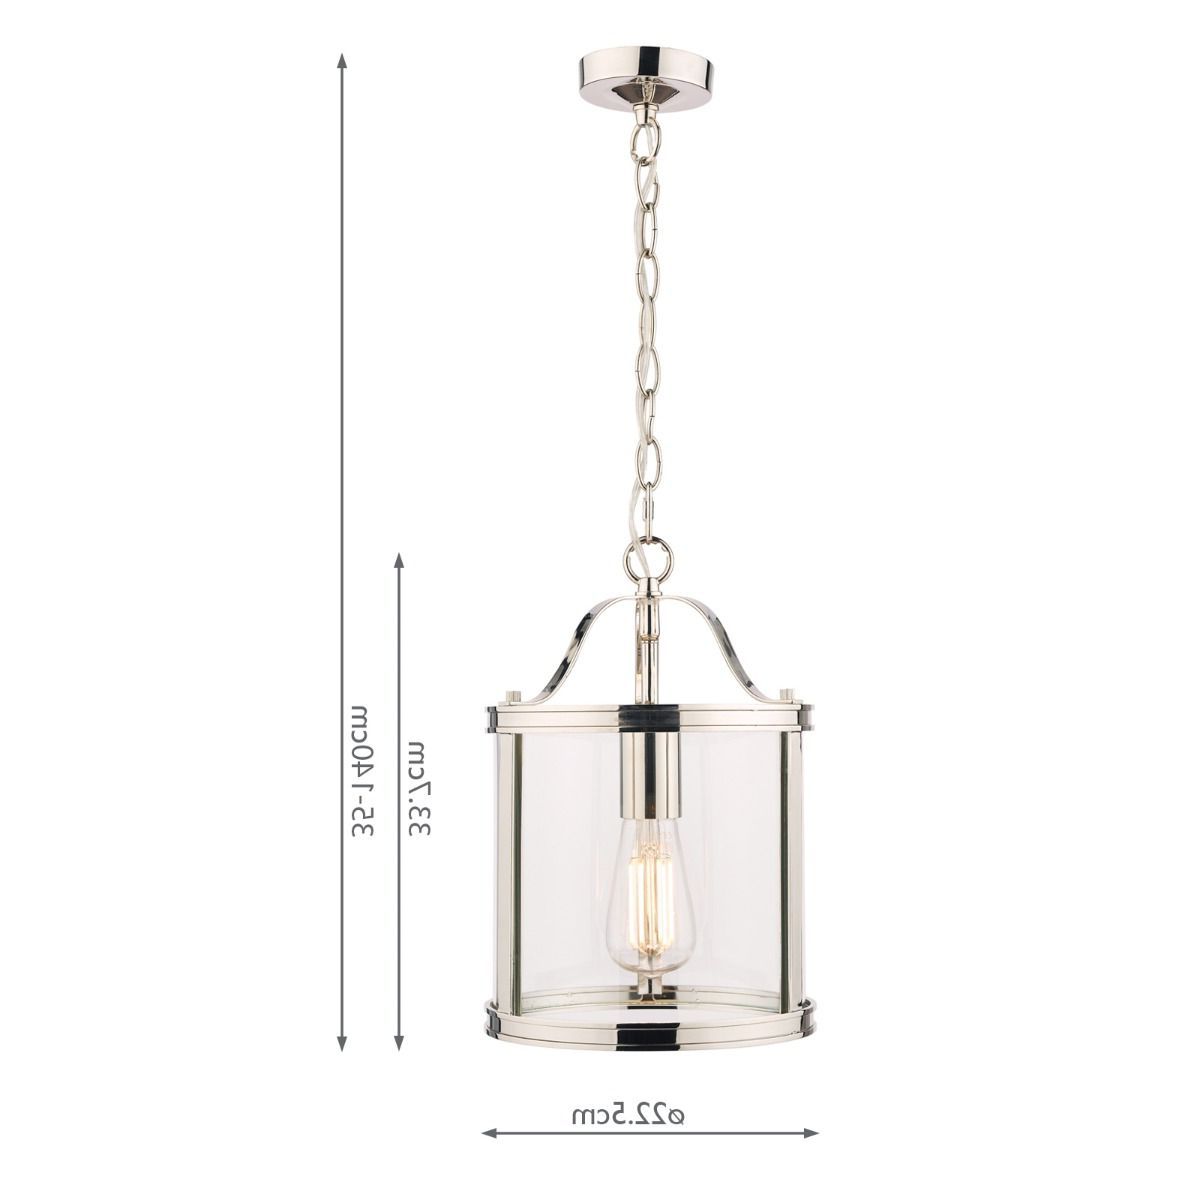 Most Popular One Light Lantern Chandeliers Intended For Laura Ashley Harrington Polished Nickel 1 Light Lantern Ceiling Light (View 14 of 15)